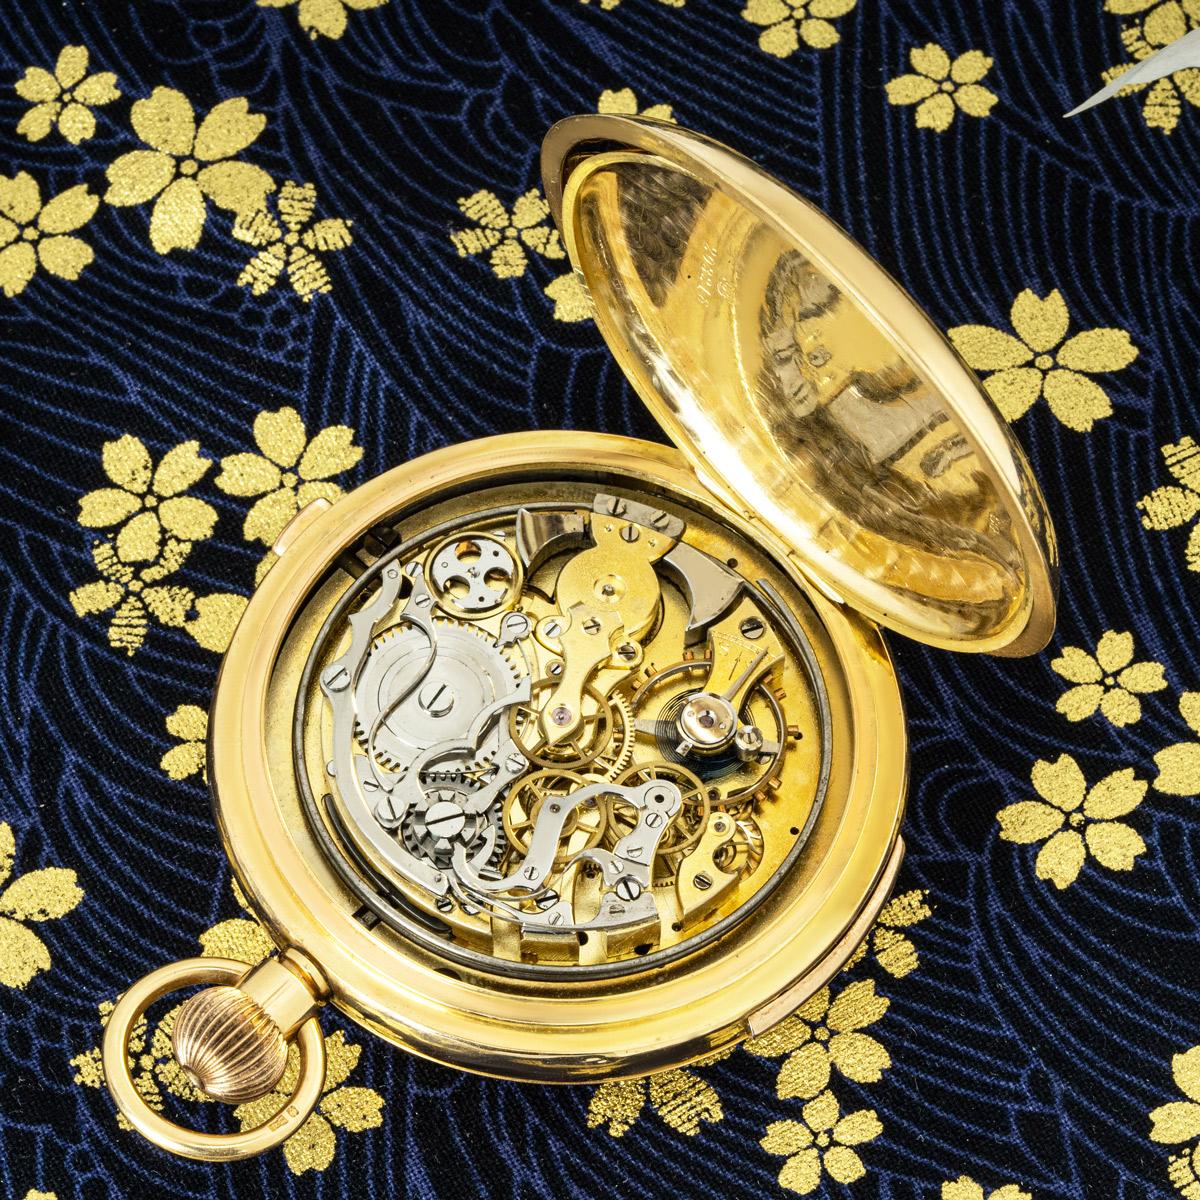 A Gold Calendar Minute Repeater Chronograph Half Hunter Pocket Watch C1900 For Sale 5